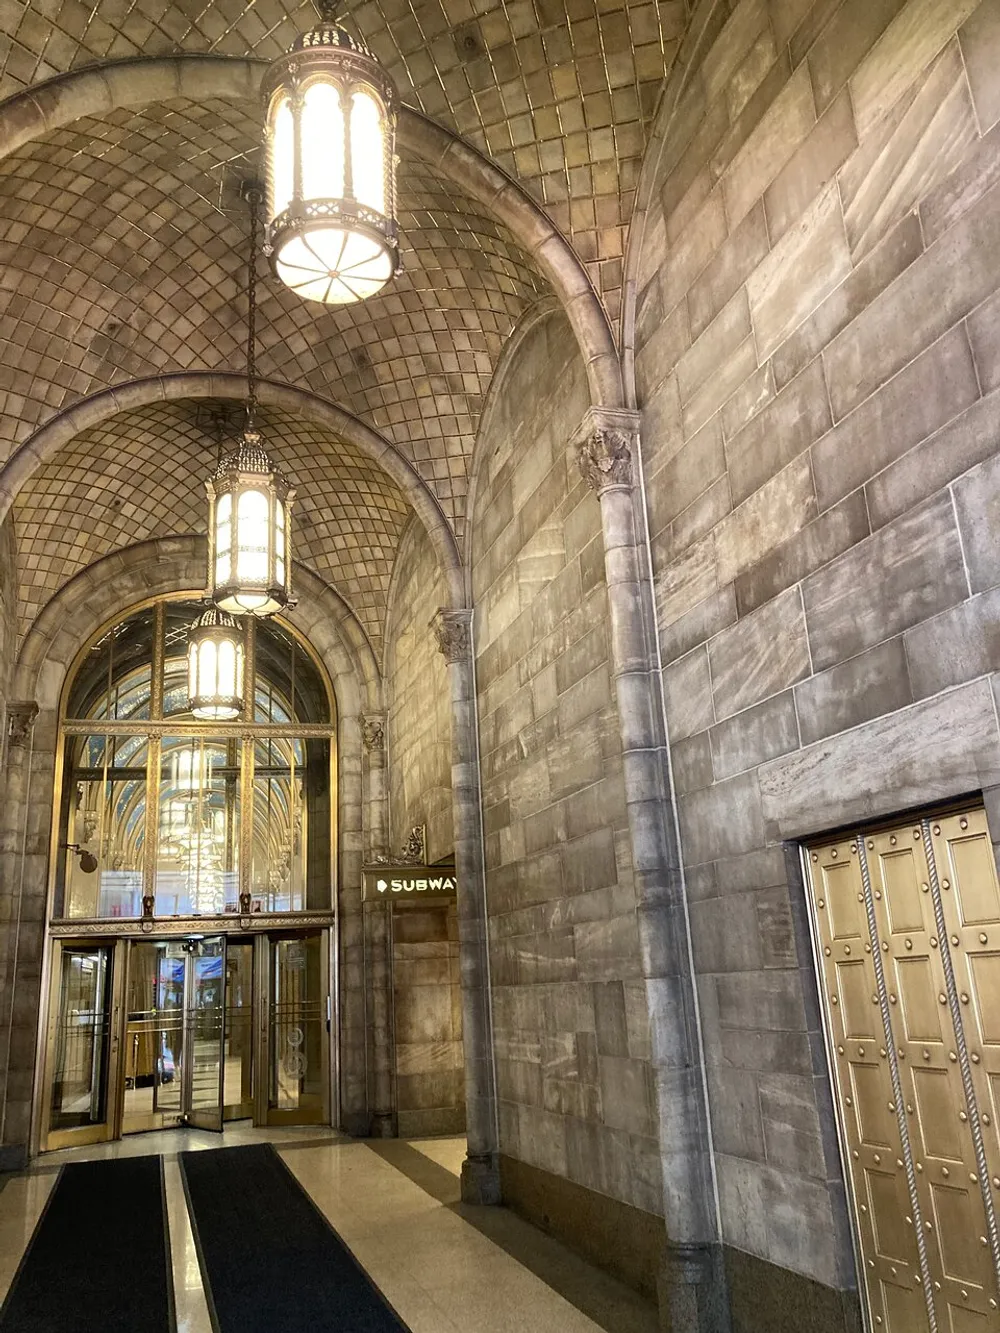 This image displays an elegant vaulted hallway with an arched ceiling ornate hanging lanterns and a sign indicating the entrance to a subway reflecting a blend of classic architectural grandeur with urban functionality